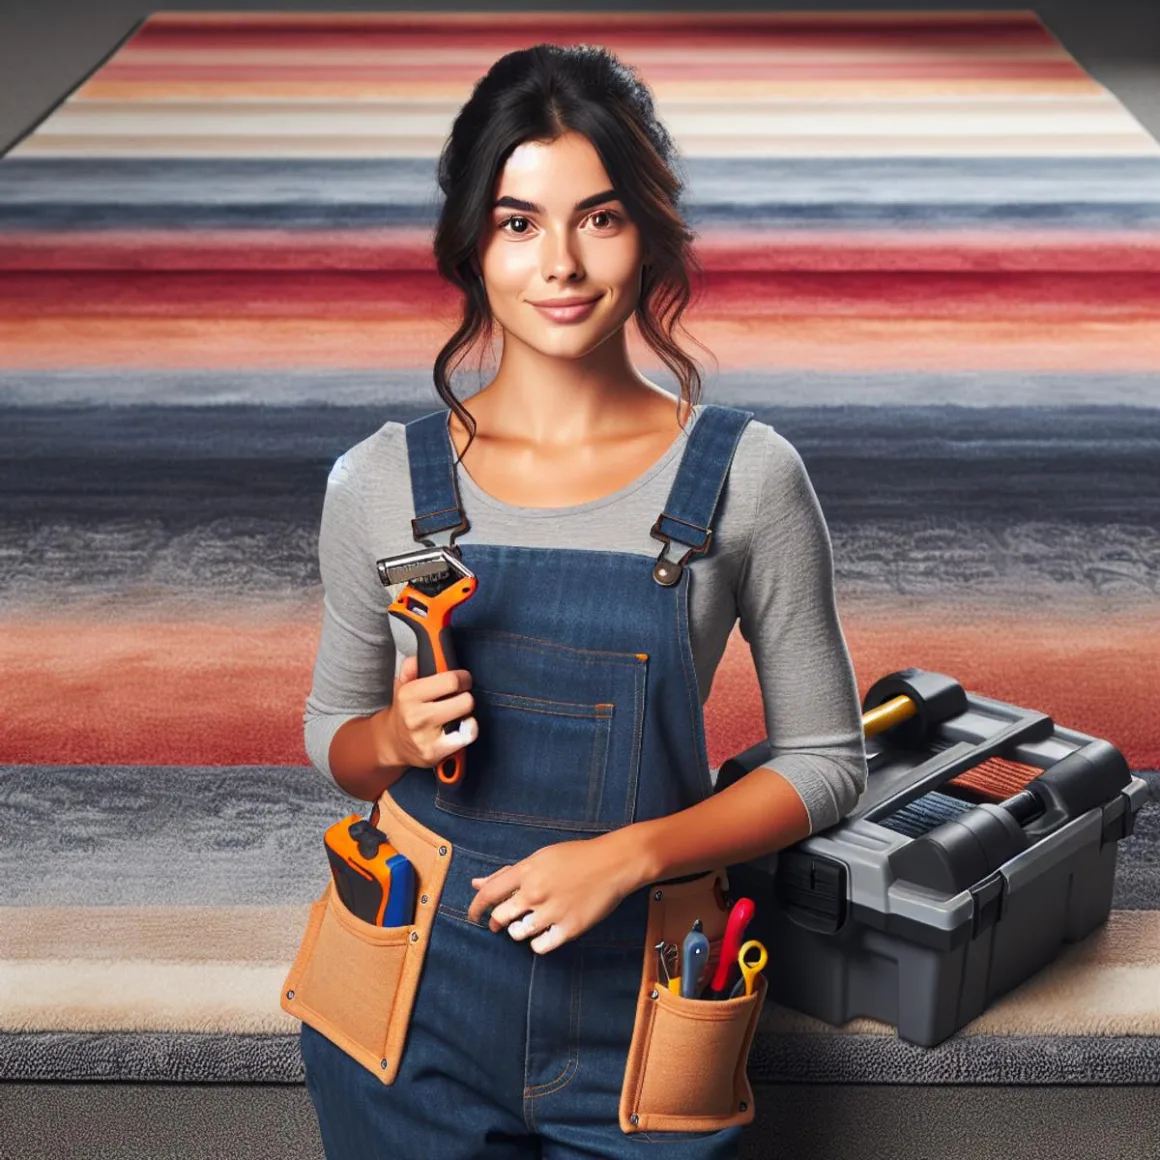 A carpet installer with her tools, standing next to a well-laid carpet gradient.